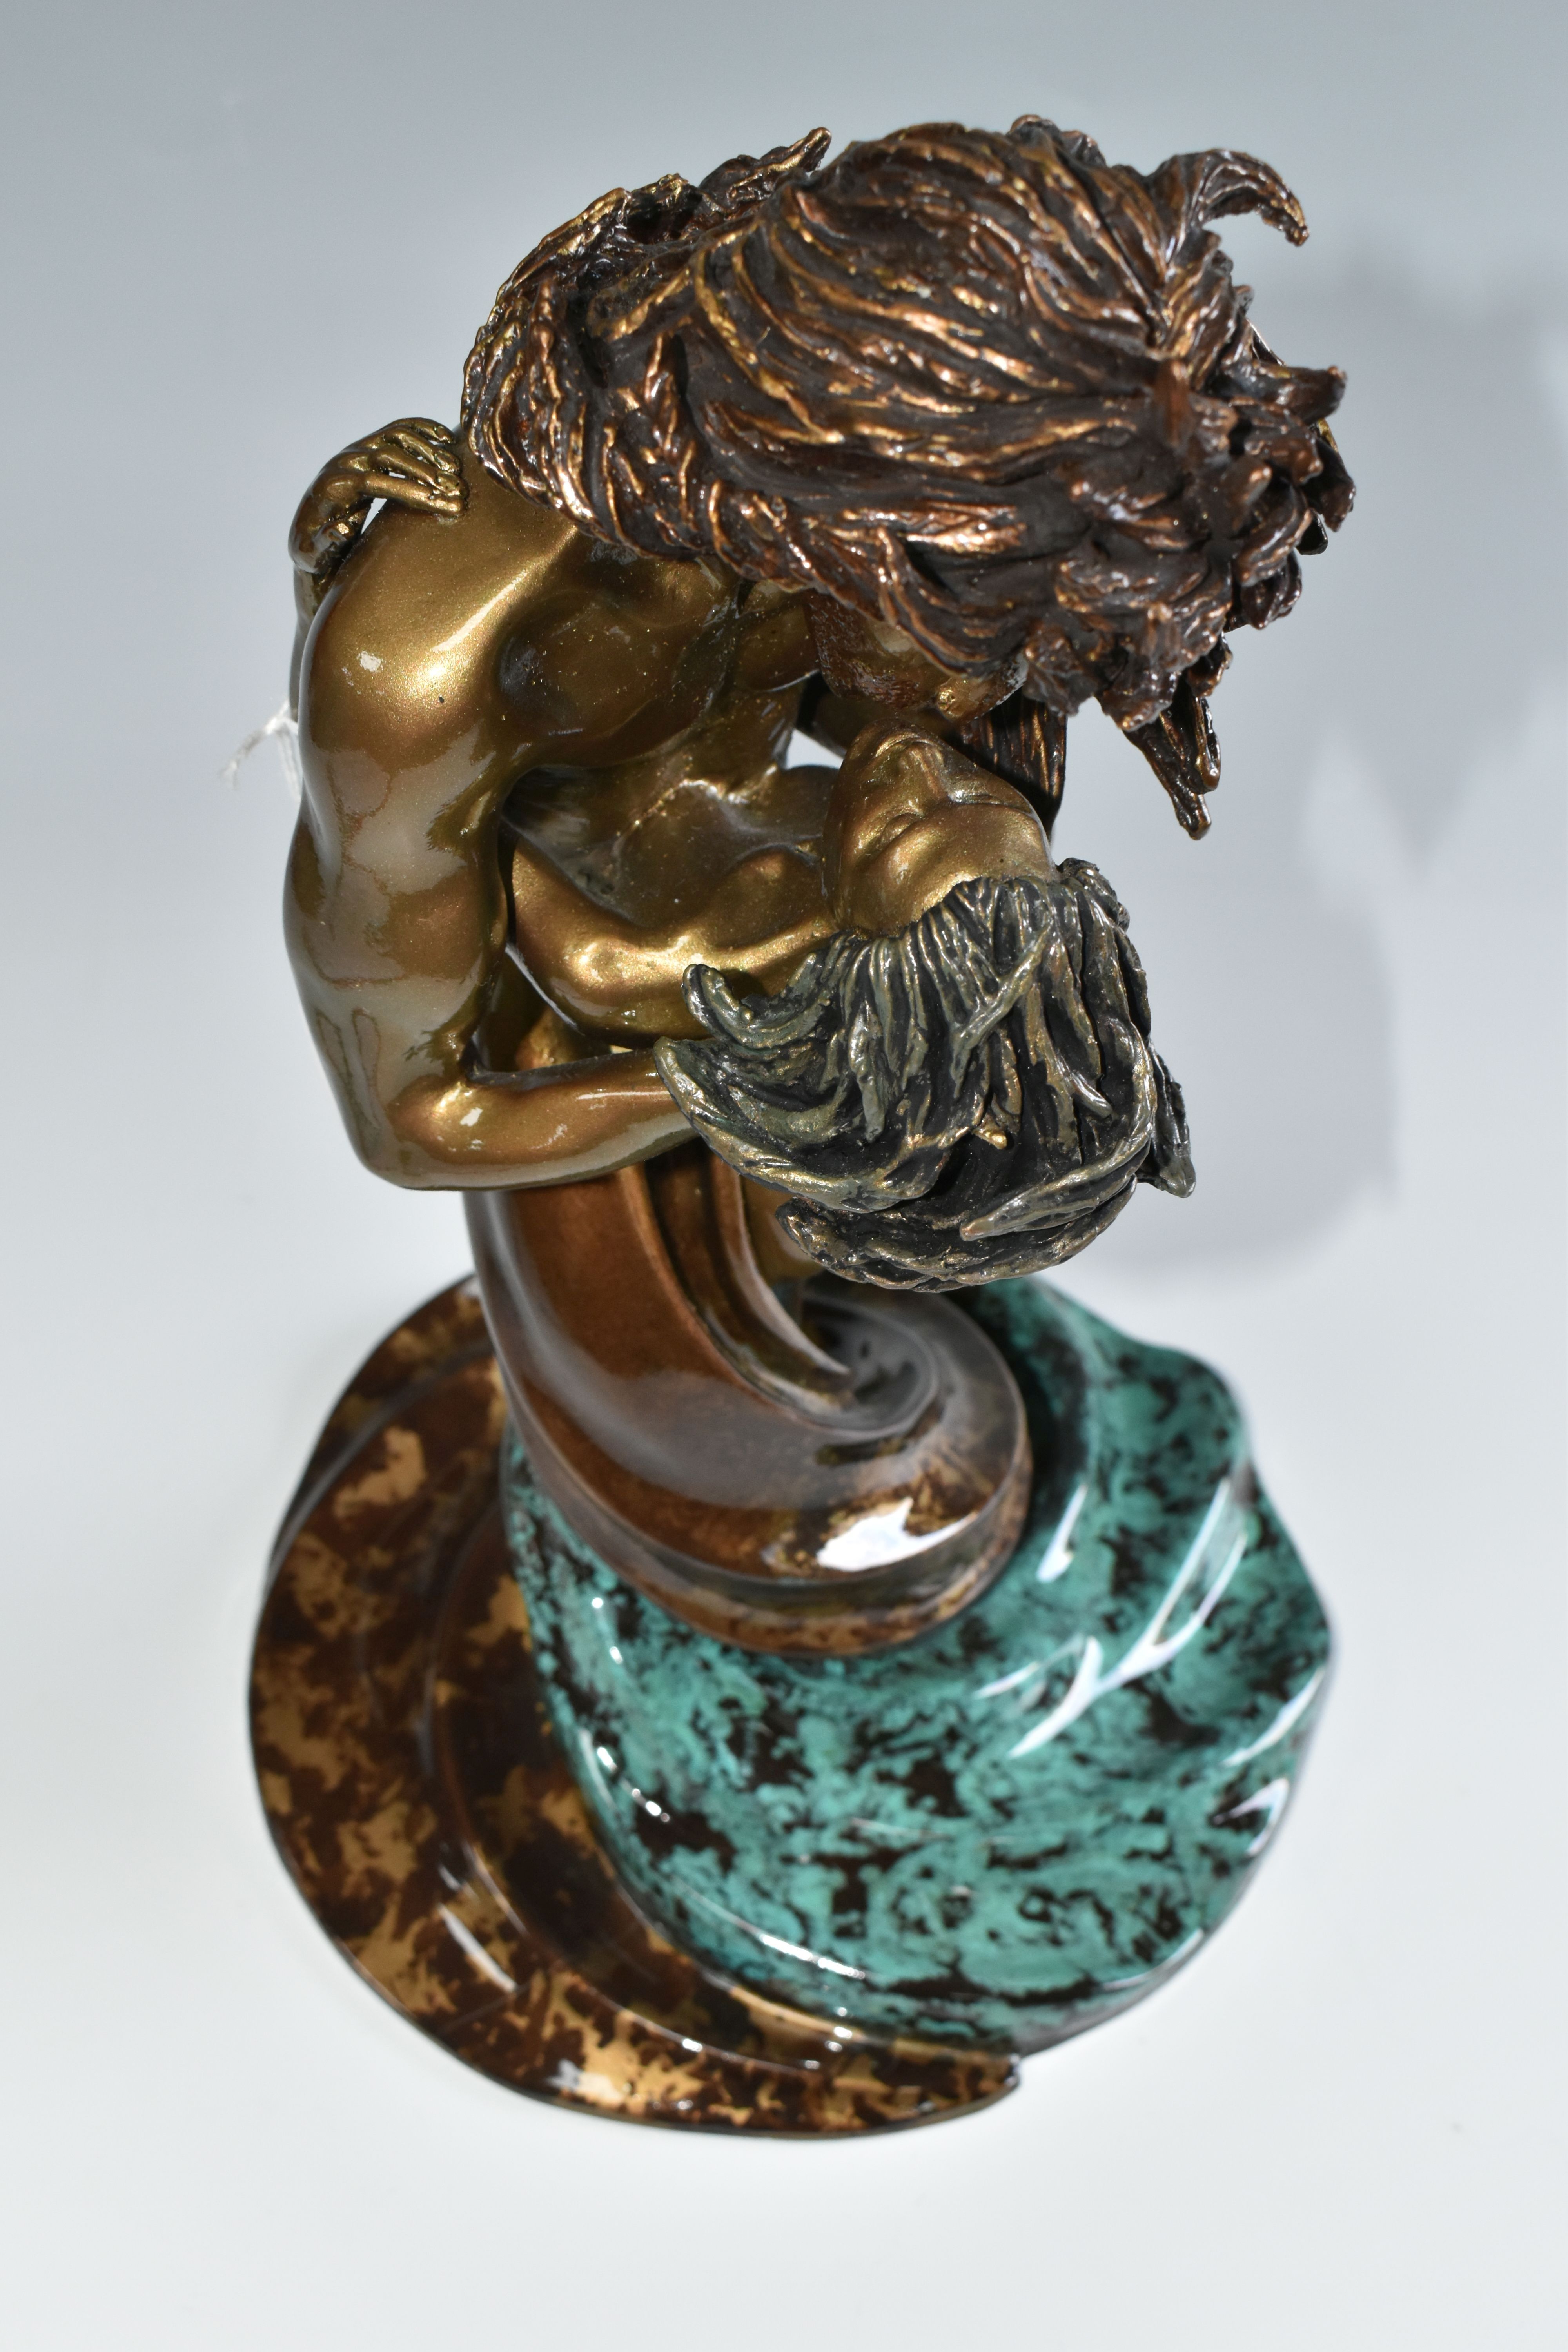 A LIMITED EDITION BONDED BRONZE OR BRONZED RESIN SCULPTURE, depicting two figures in an embrace, - Image 4 of 6